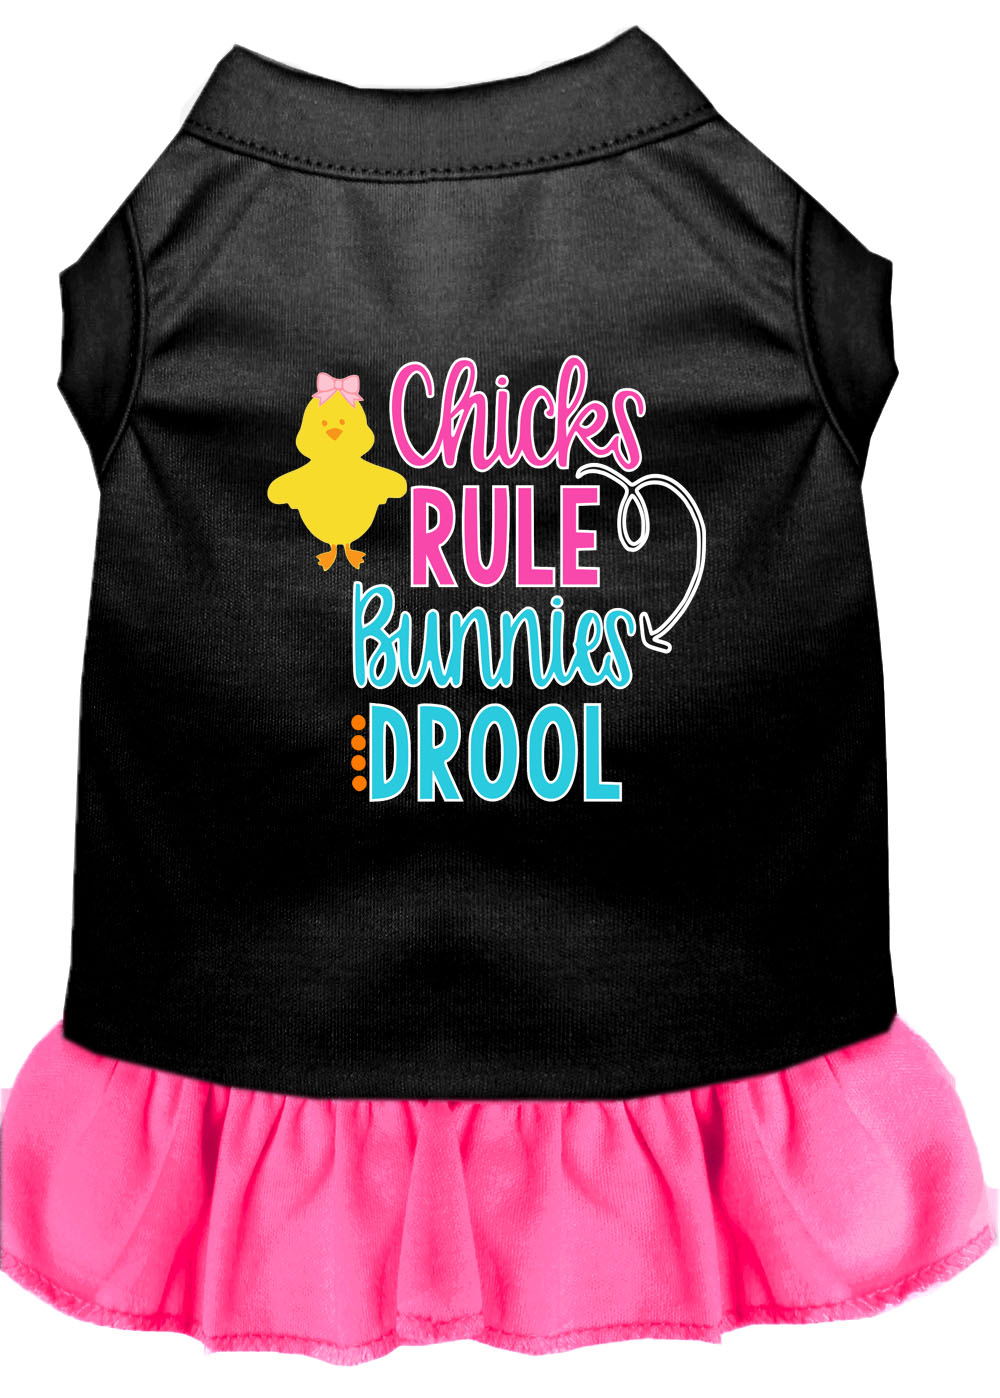 Chicks Rule Screen Print Dog Dress Black with Bright Pink XS